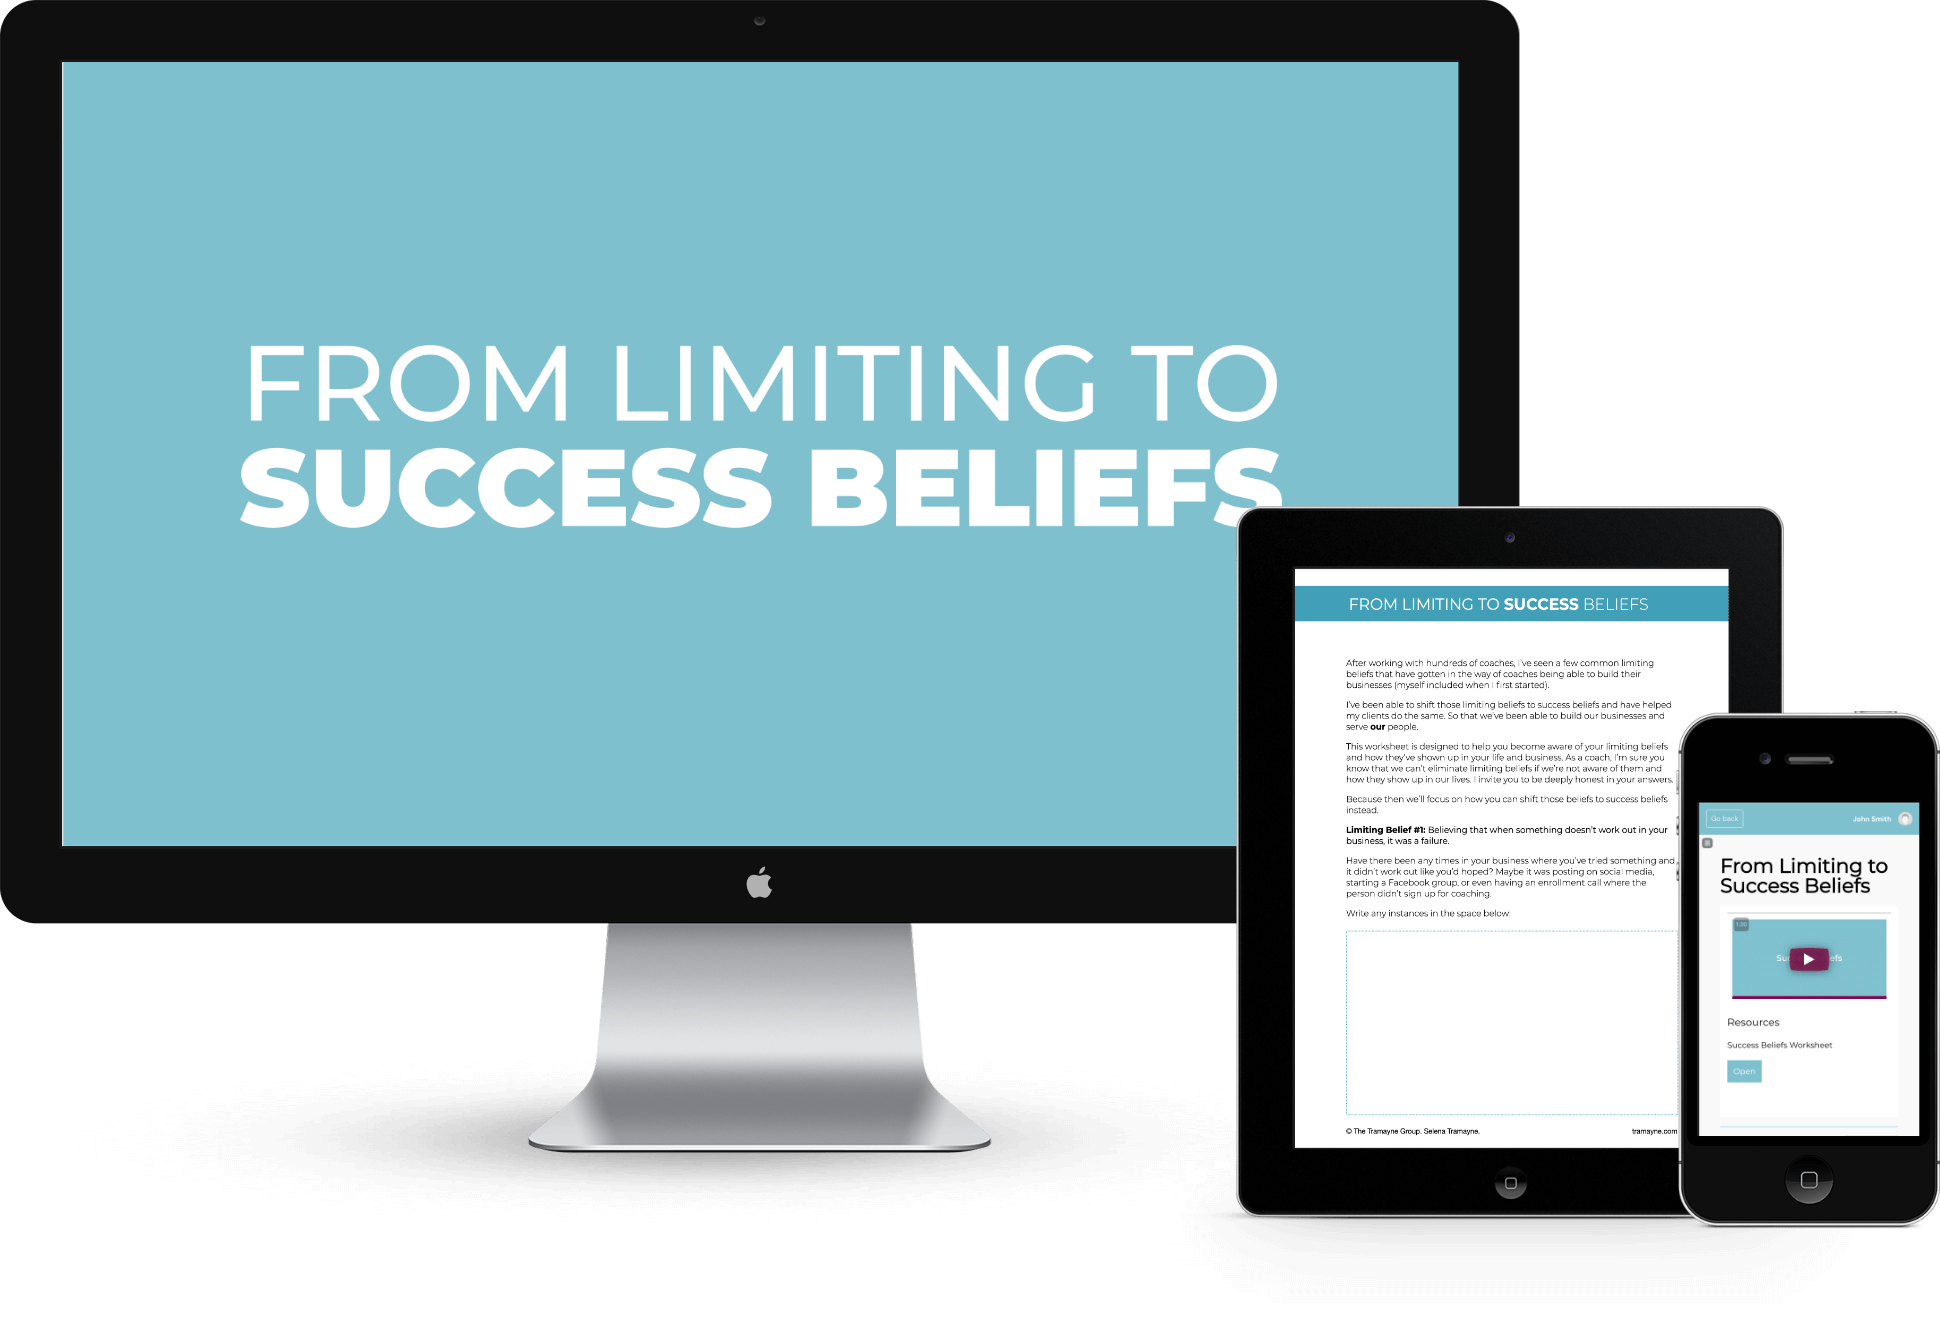 From limiting to success beliefs